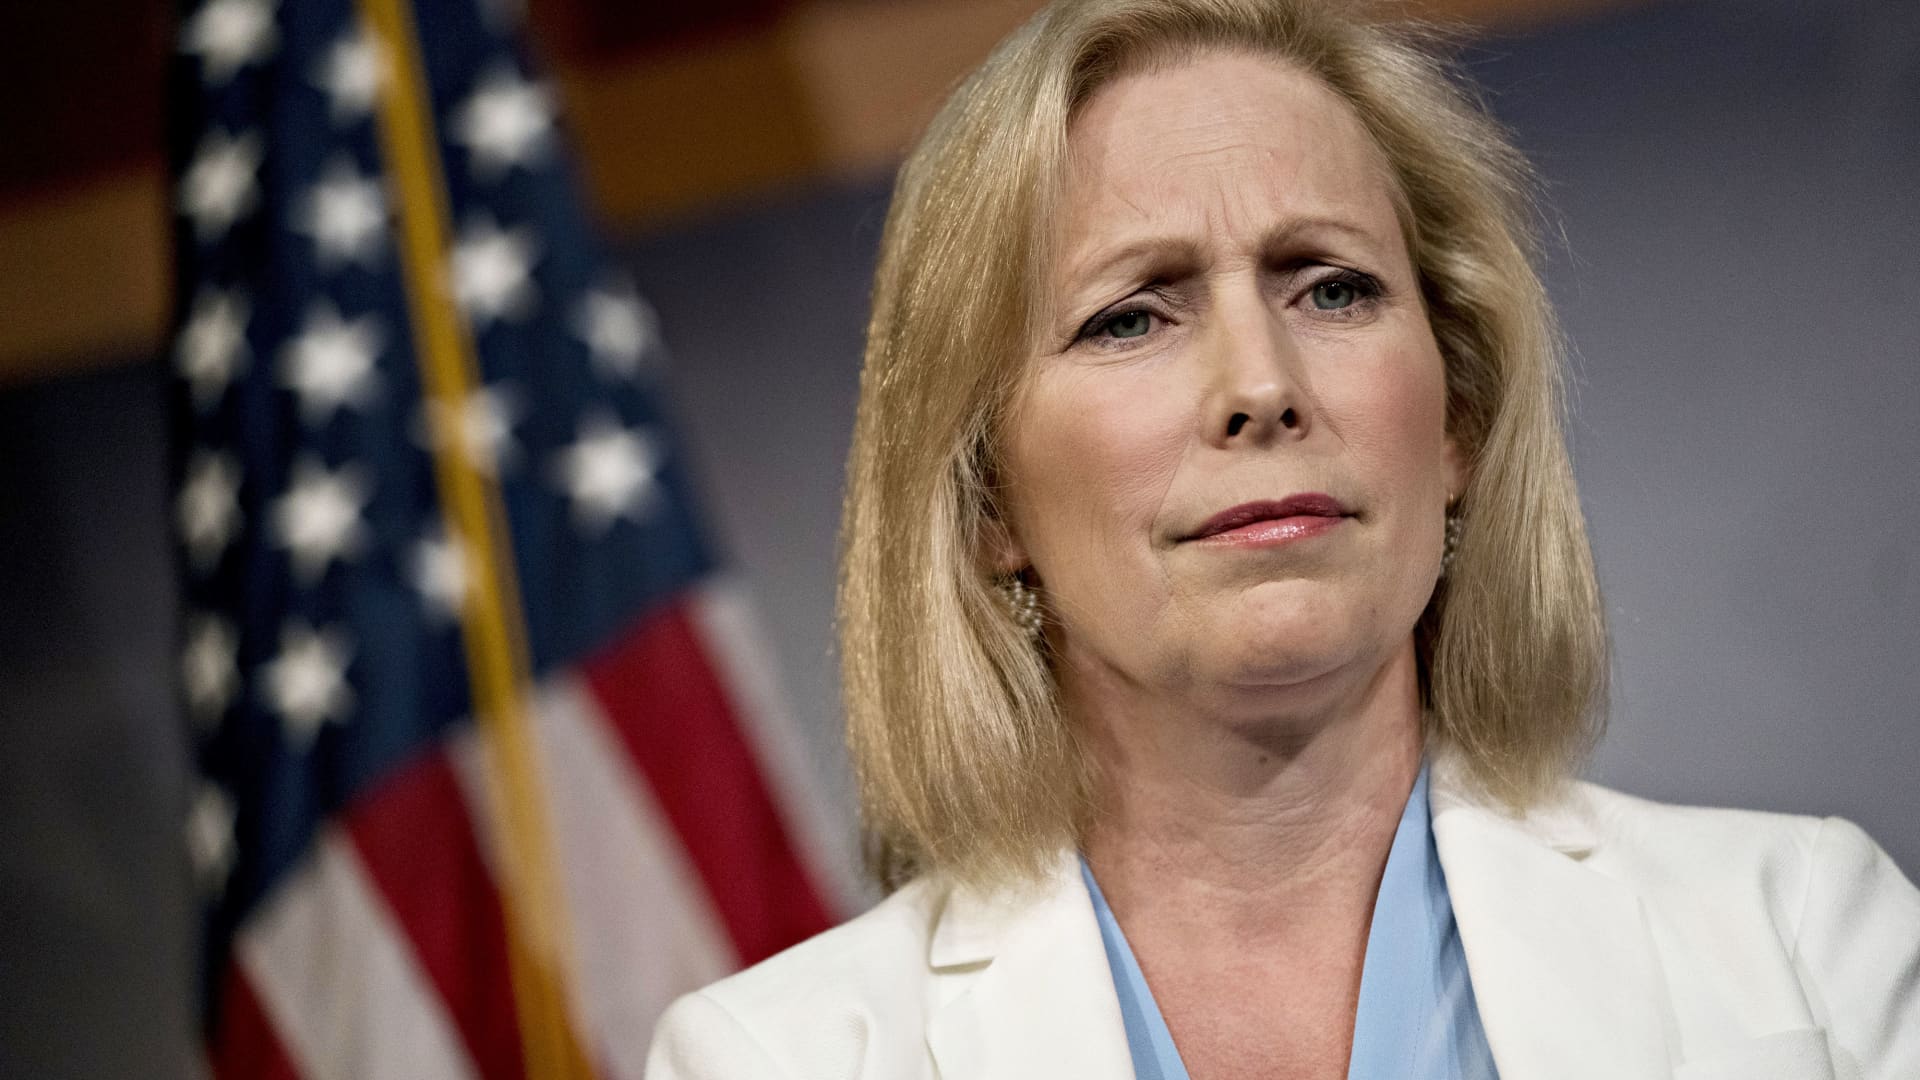 Senator Kristen Gillibrand, a Democrat from New York, listens during a news conference on the September 11th Victim Compensation Fund at the U.S. Capitol in Washington, D.C., July 18, 2019.